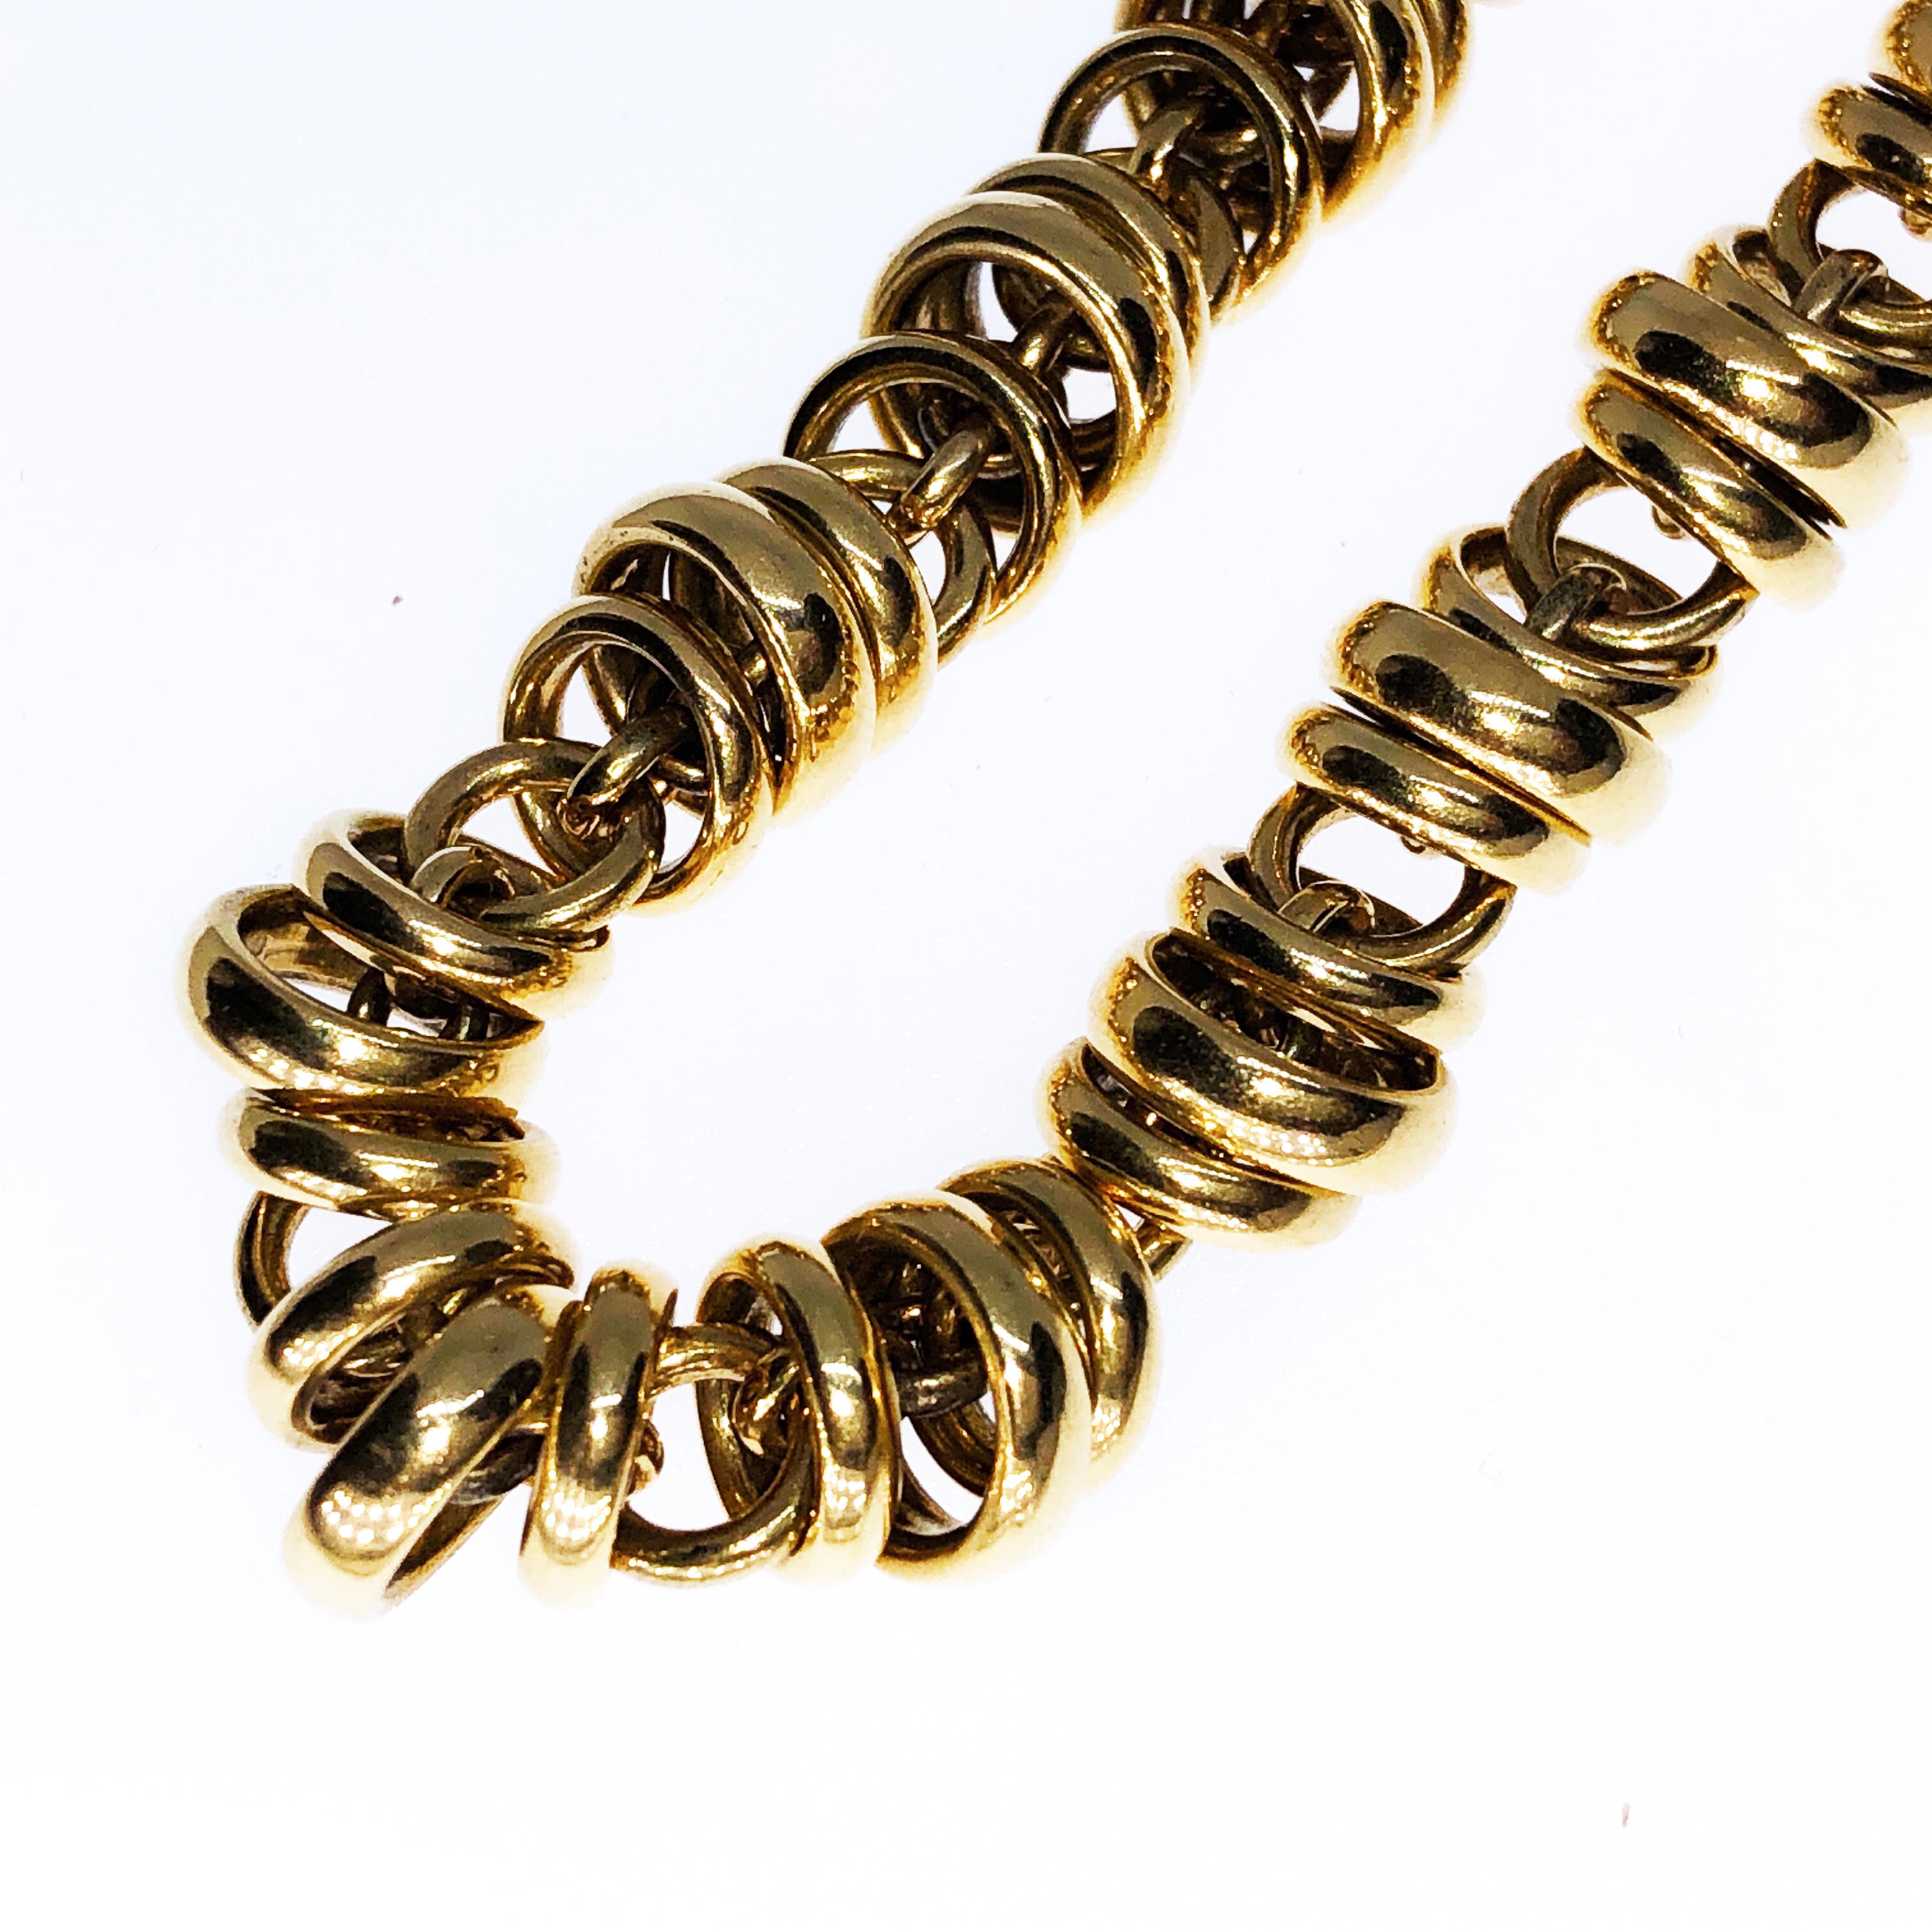 1988 Iconic Pomellato 18 Karat Solid Yellow Gold Chain Necklace 6